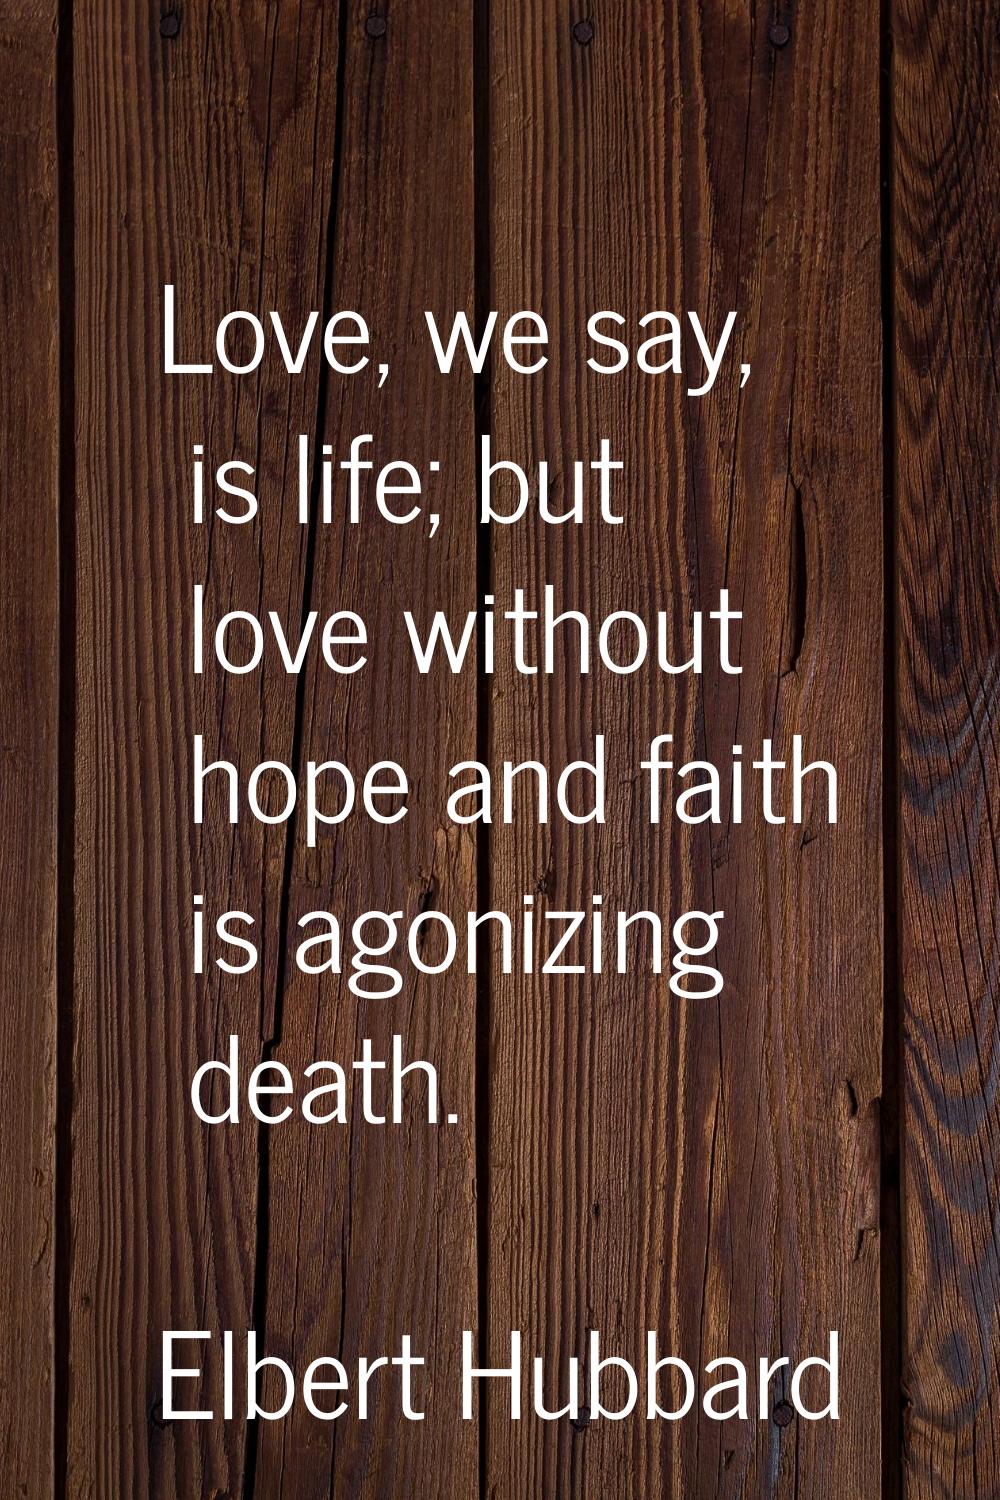 Love, we say, is life; but love without hope and faith is agonizing death.